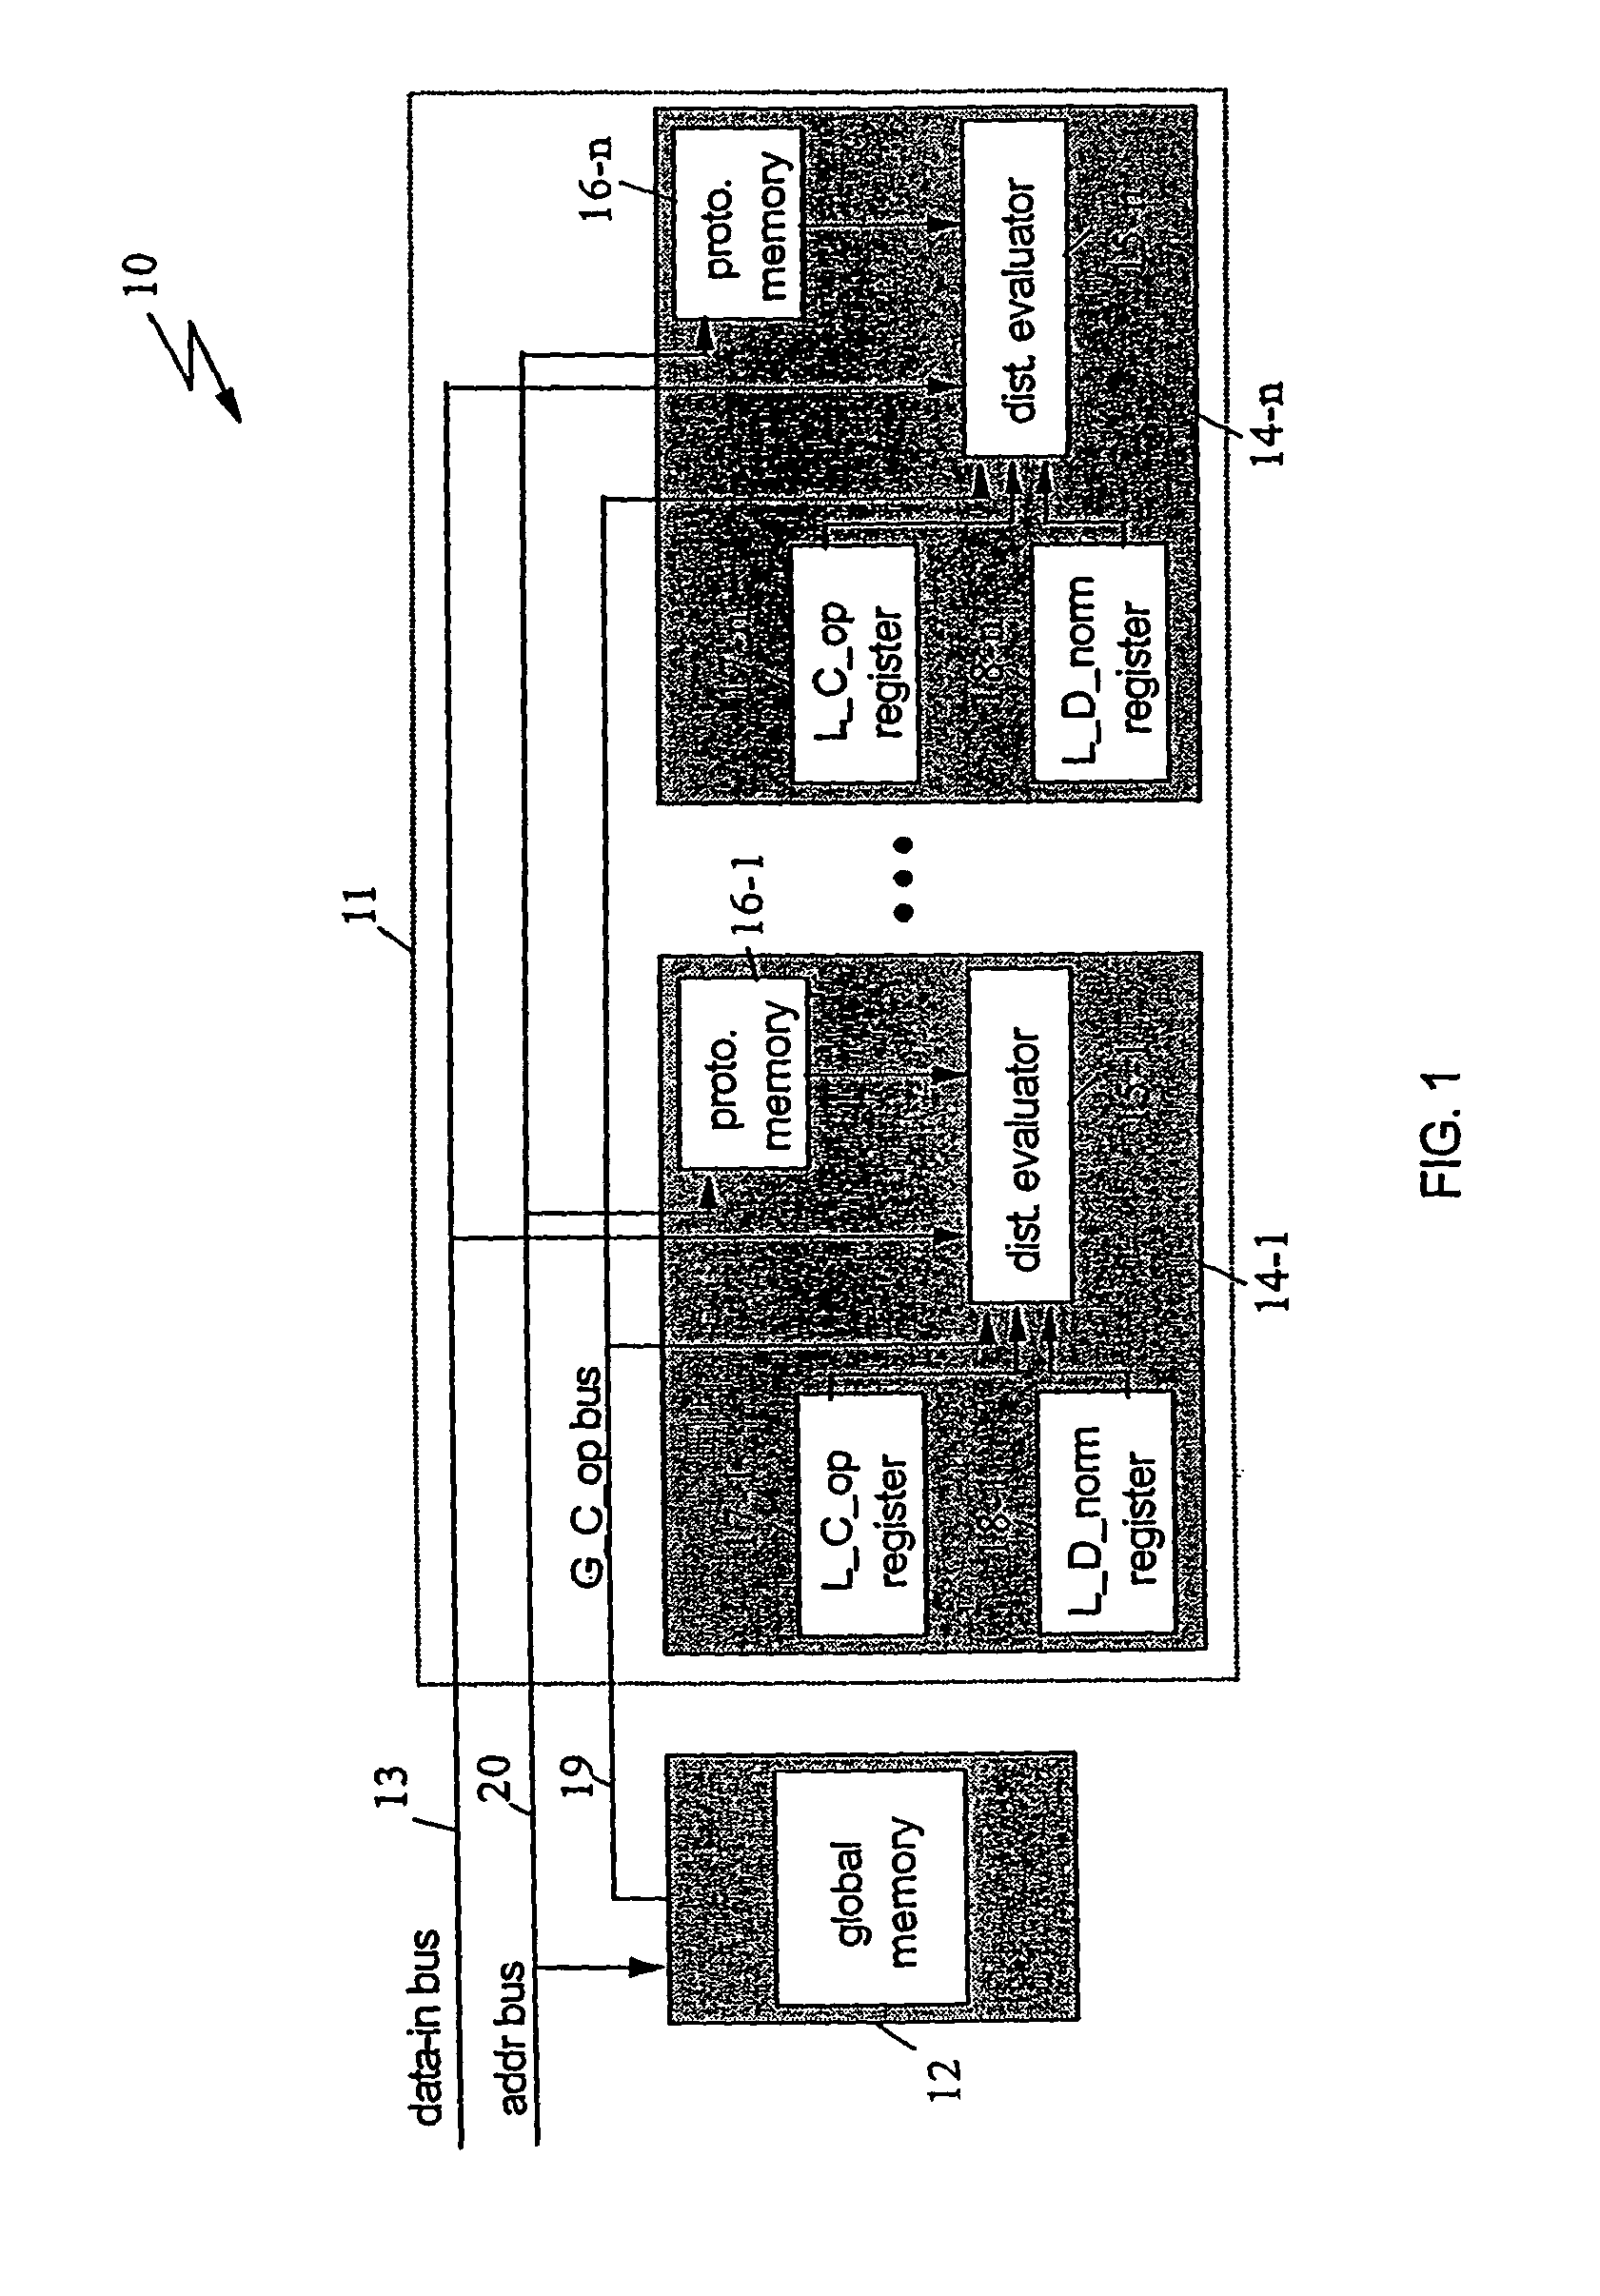 Method and circuits for associating a complex operator to each component of an input pattern presented to an artificial neural network